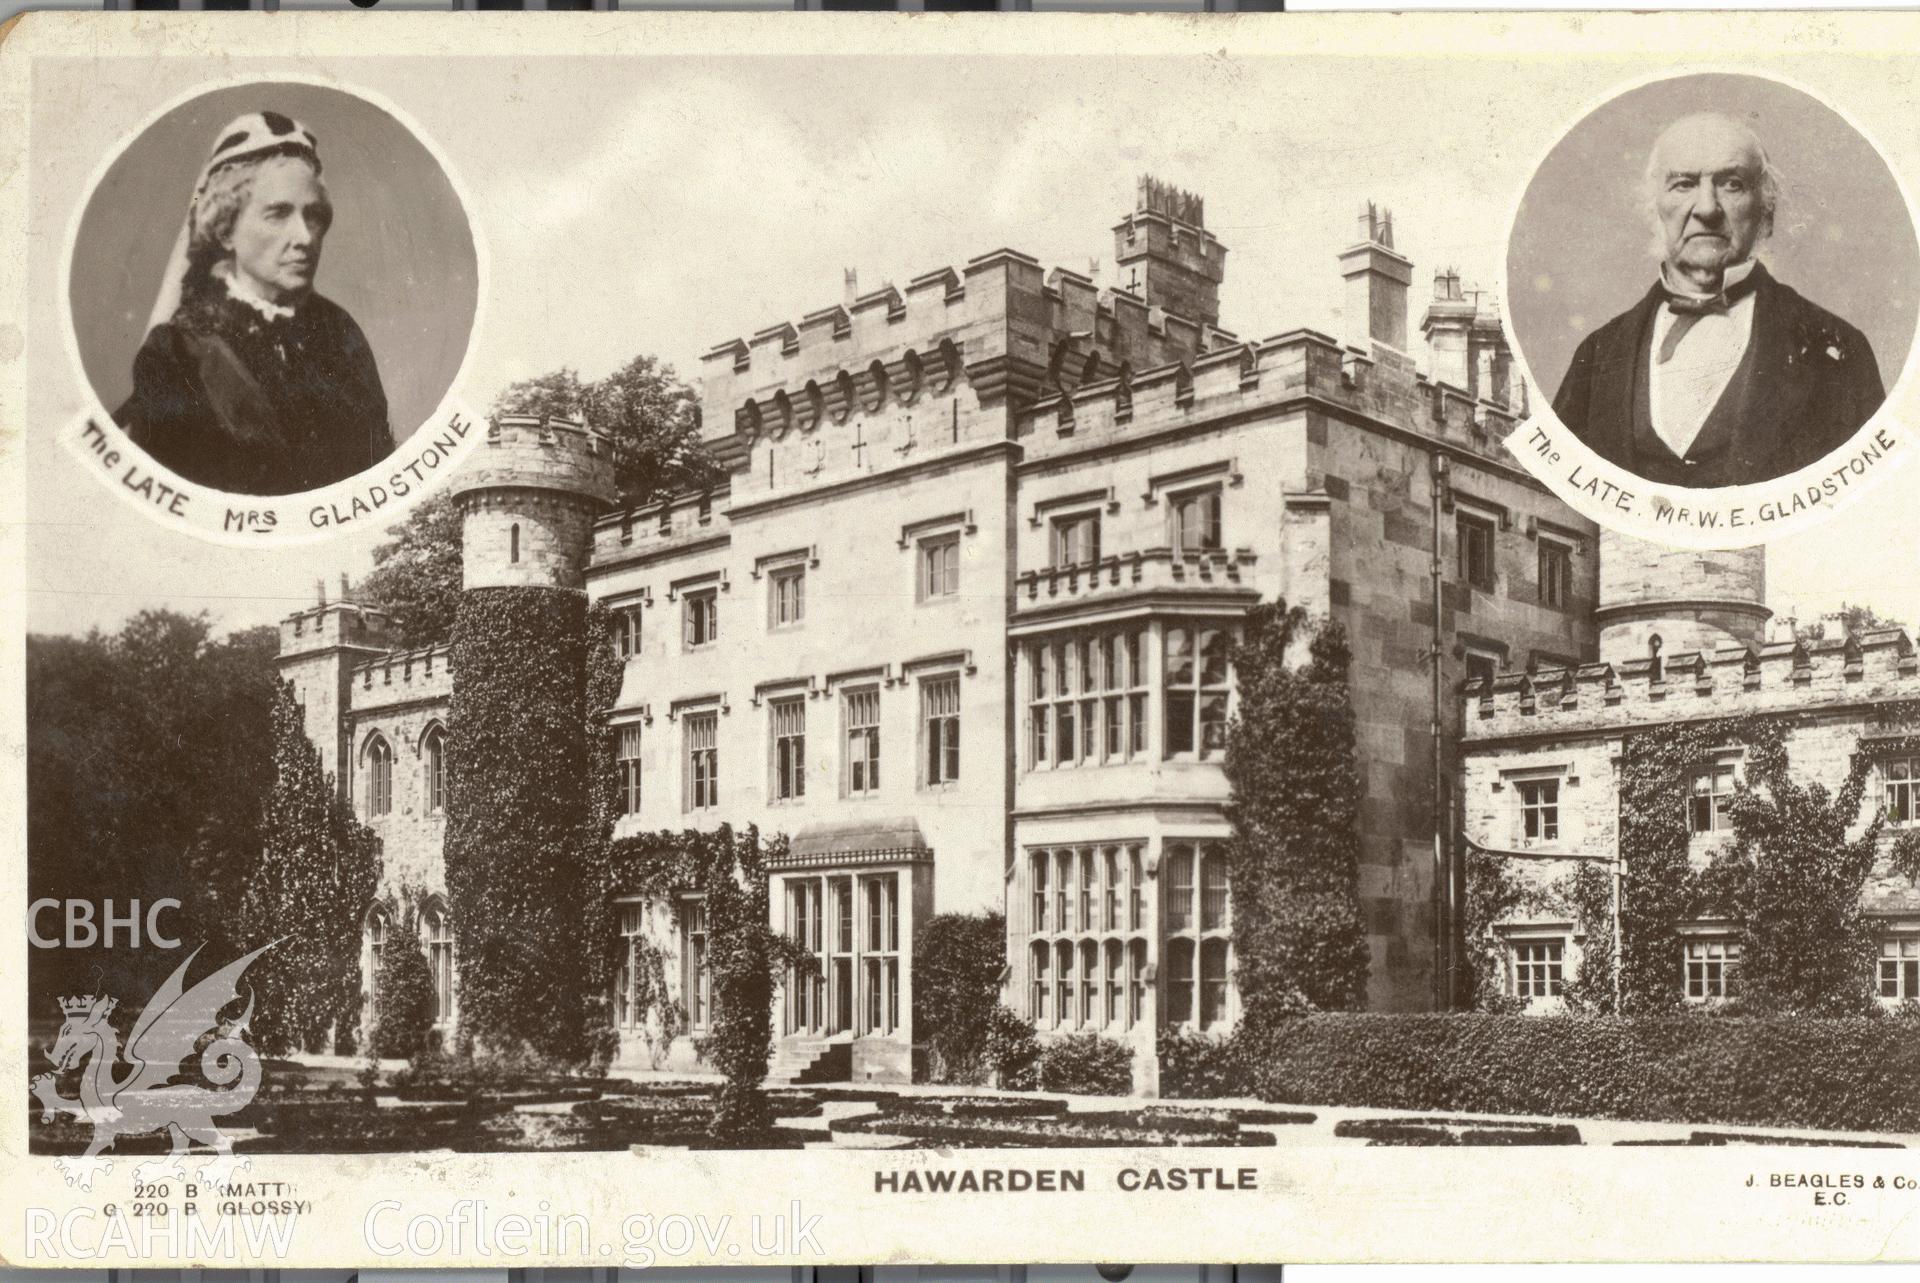 Digitised postcard image of Hawarden Castle, J Beagles & Co., Printers and Publishers, London. Produced by Parks and Gardens Data Services, from an original item in the Peter Davis Collection at Parks and Gardens UK. We hold only web-resolution images of this collection, suitable for viewing on screen and for research purposes only. We do not hold the original images, or publication quality scans.